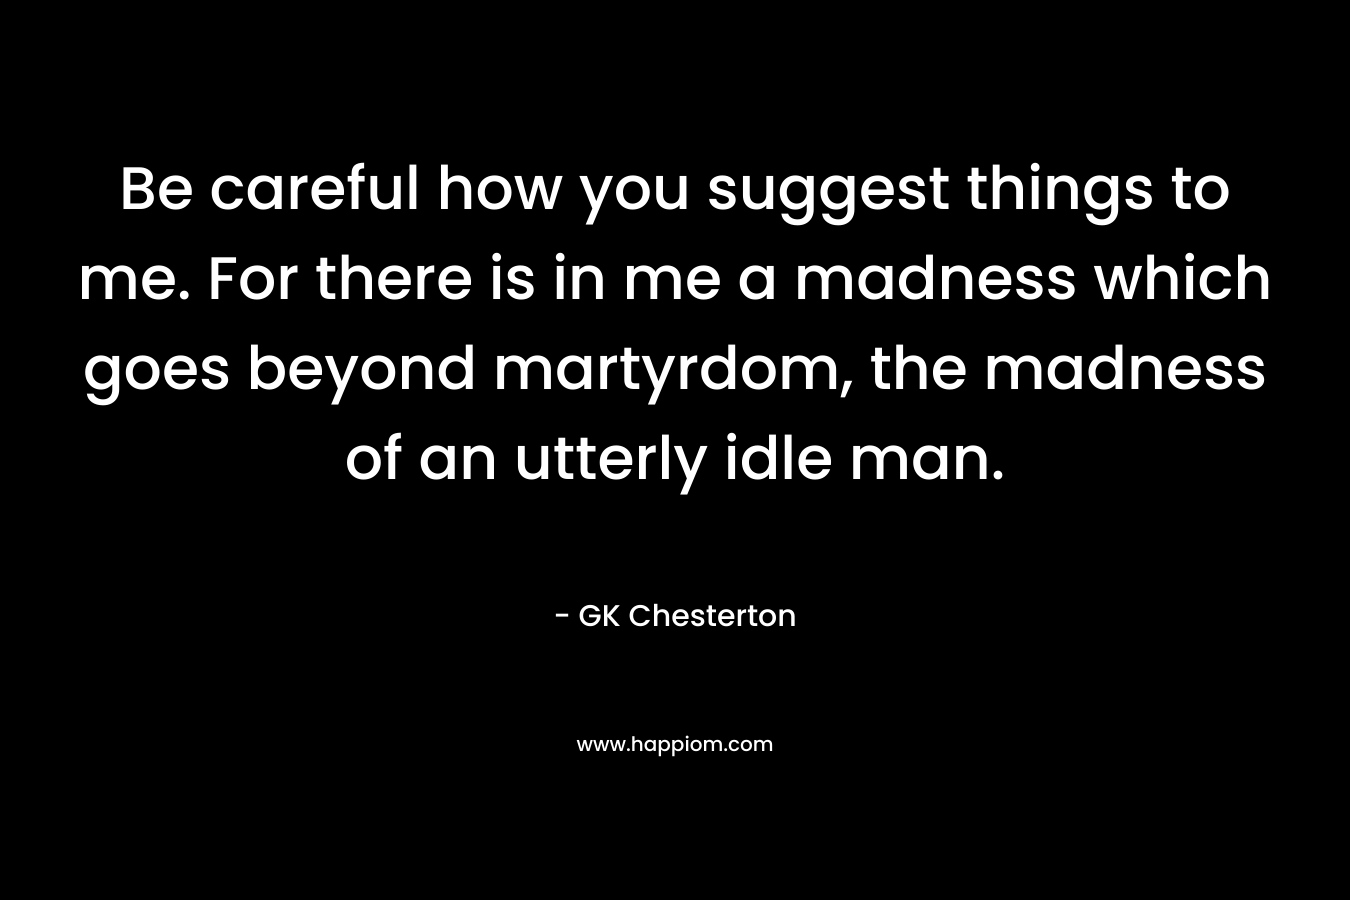 Be careful how you suggest things to me. For there is in me a madness which goes beyond martyrdom, the madness of an utterly idle man. – GK Chesterton